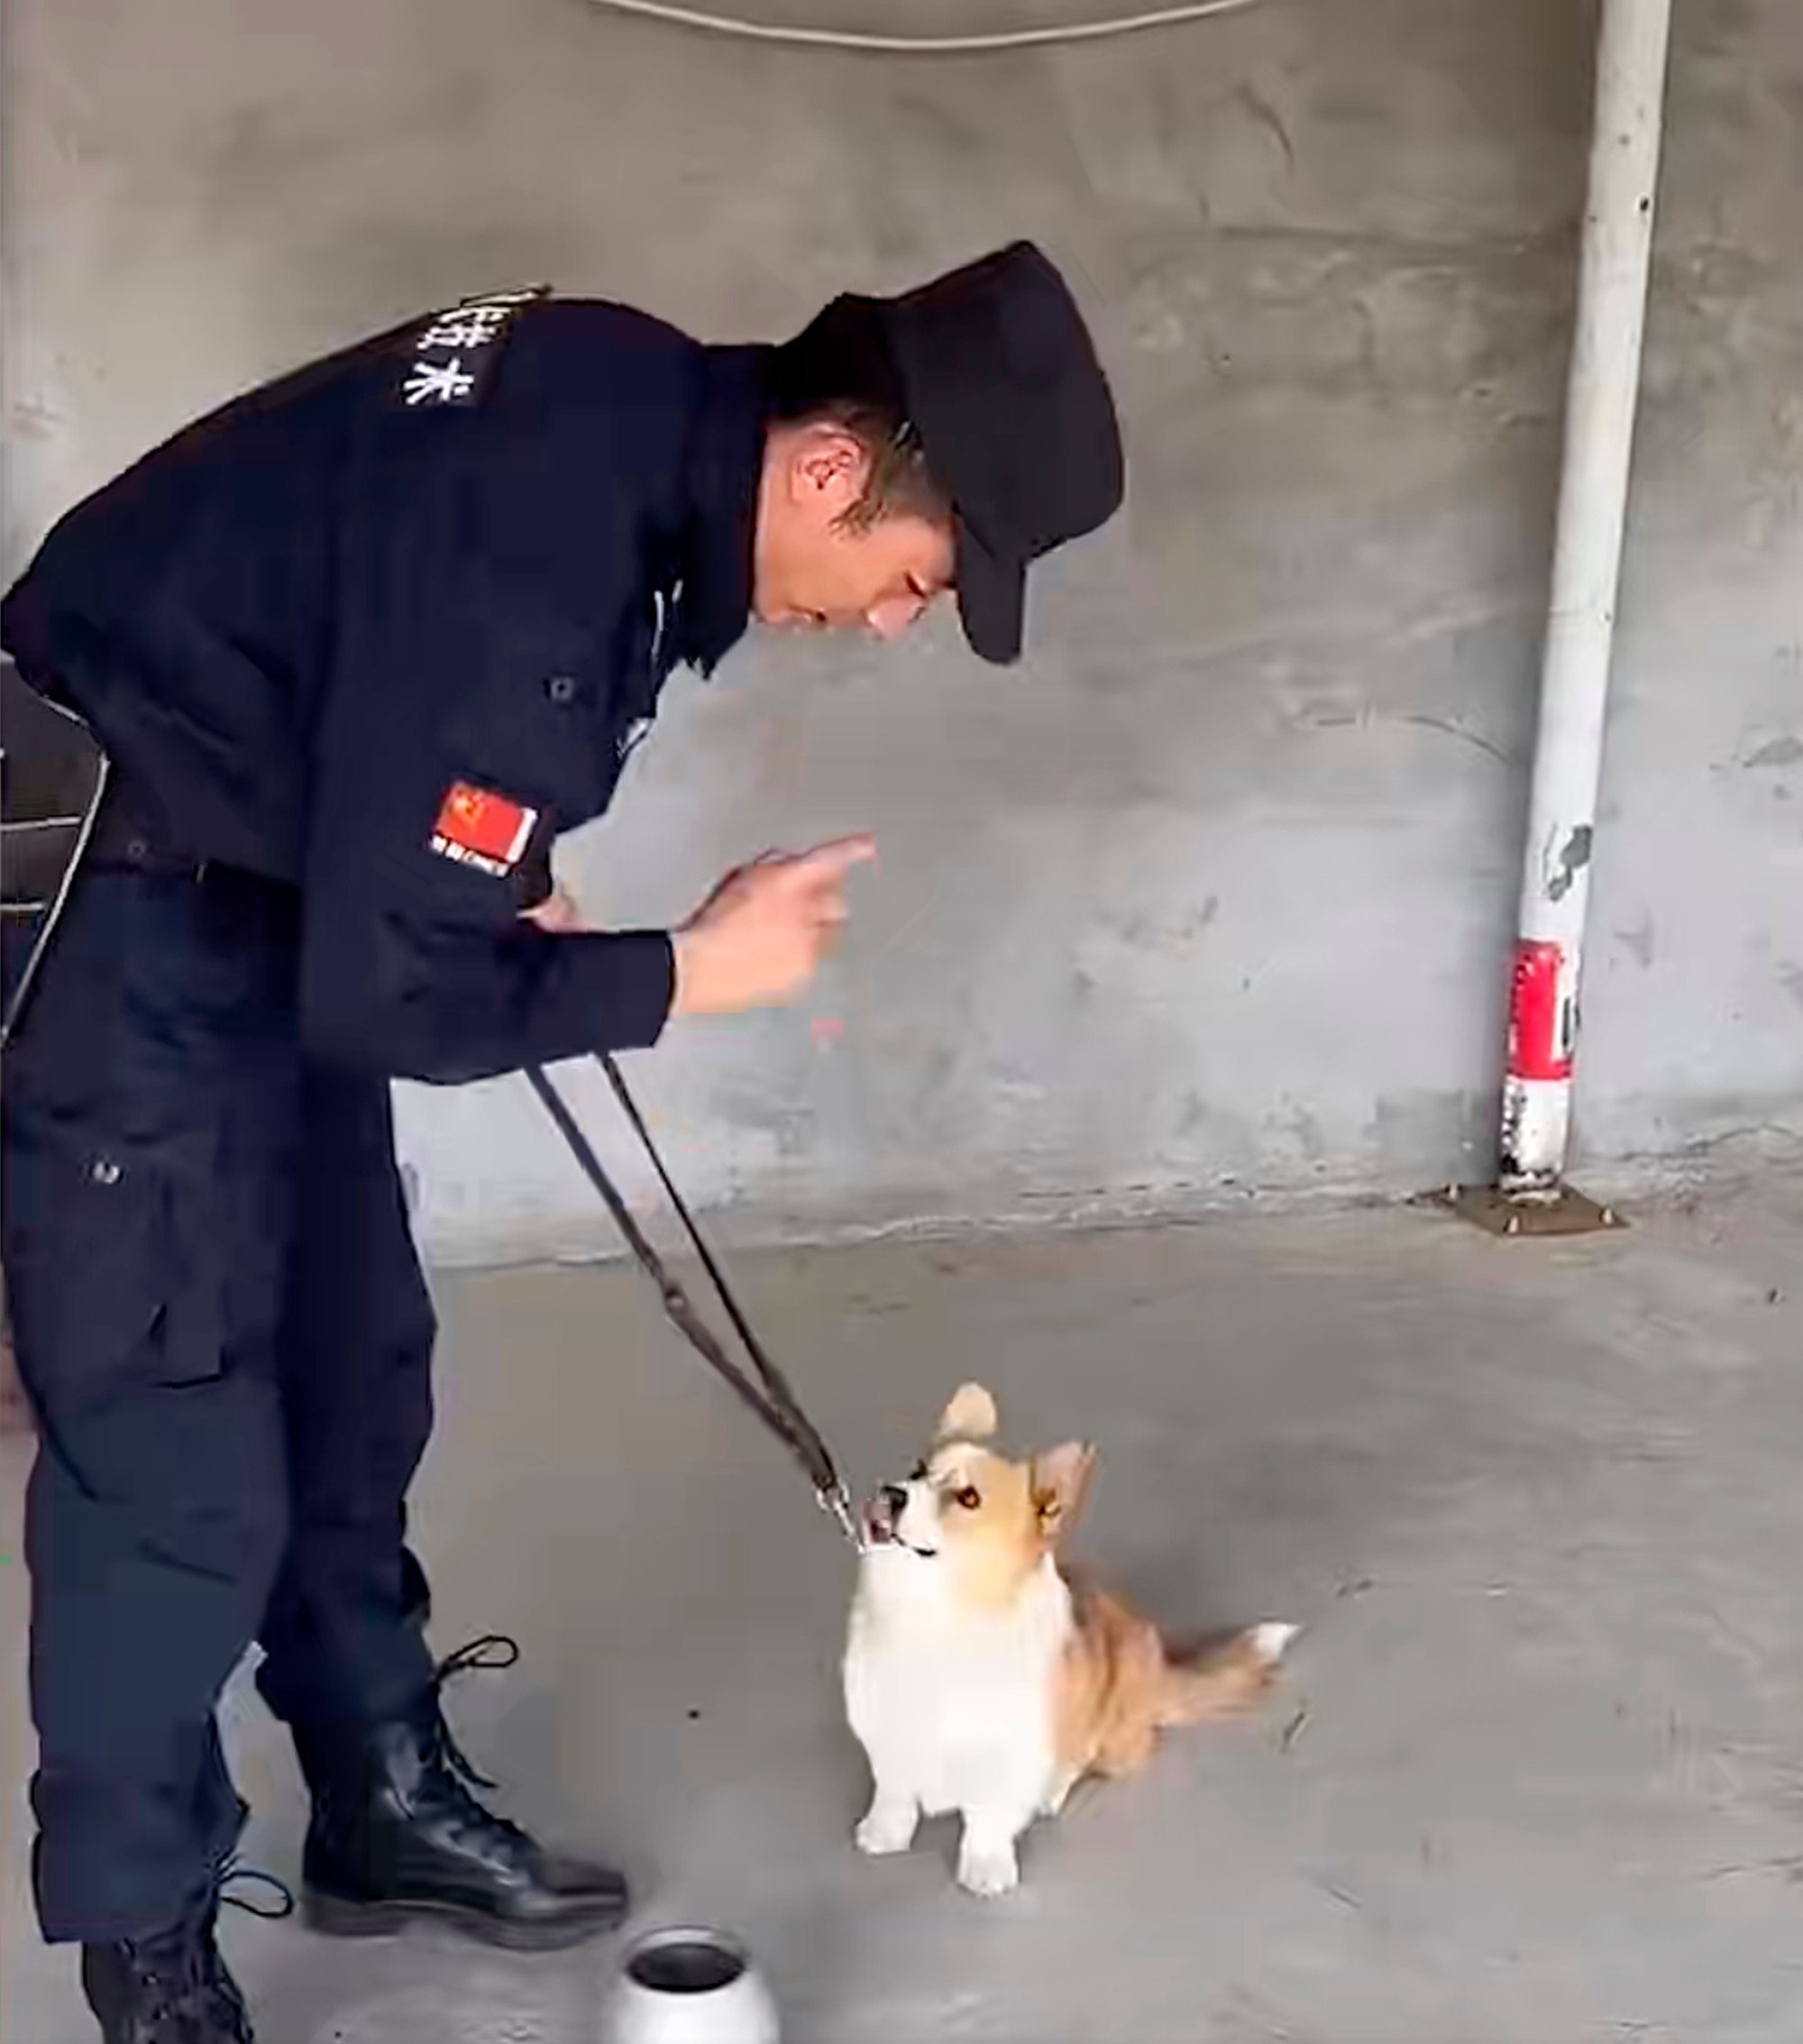 China’s first Corgi police dog makes public debut, hailed for under-car bomb detection skills, attitude and fitness, wins netizens over